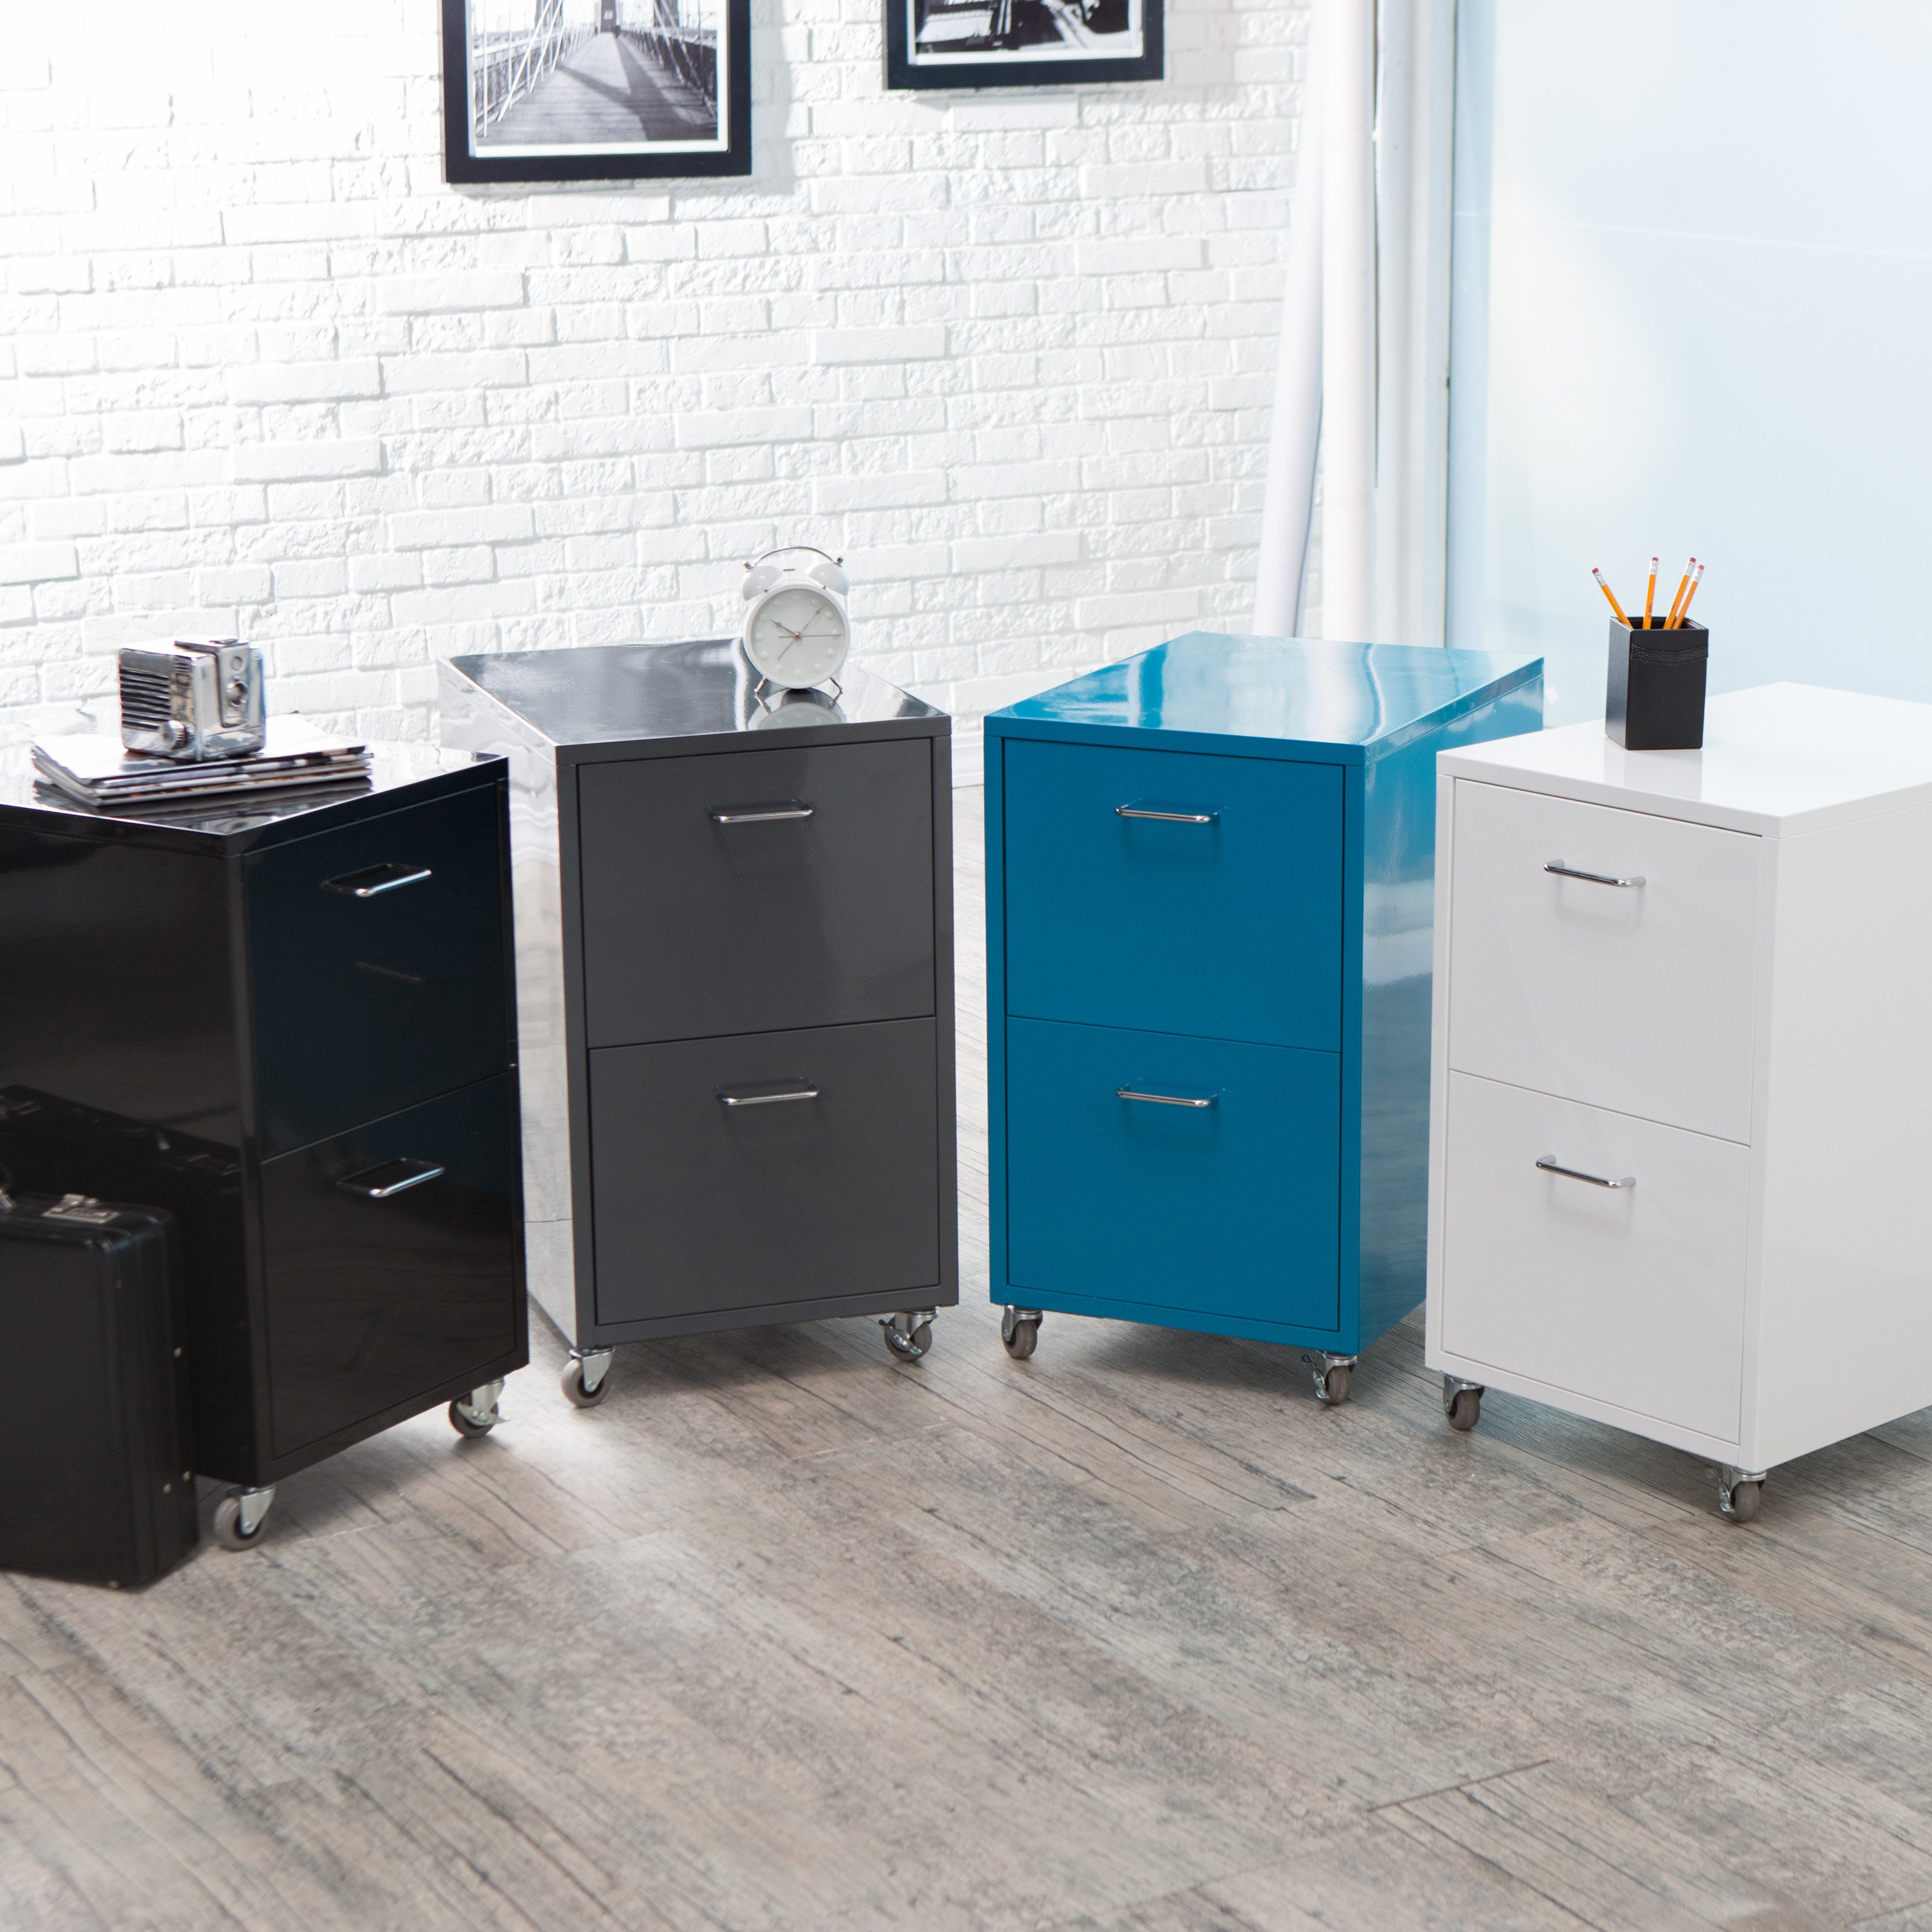 No More Boring Stylish Filing Cabinets Homesfeed intended for sizing 3200 X 3200